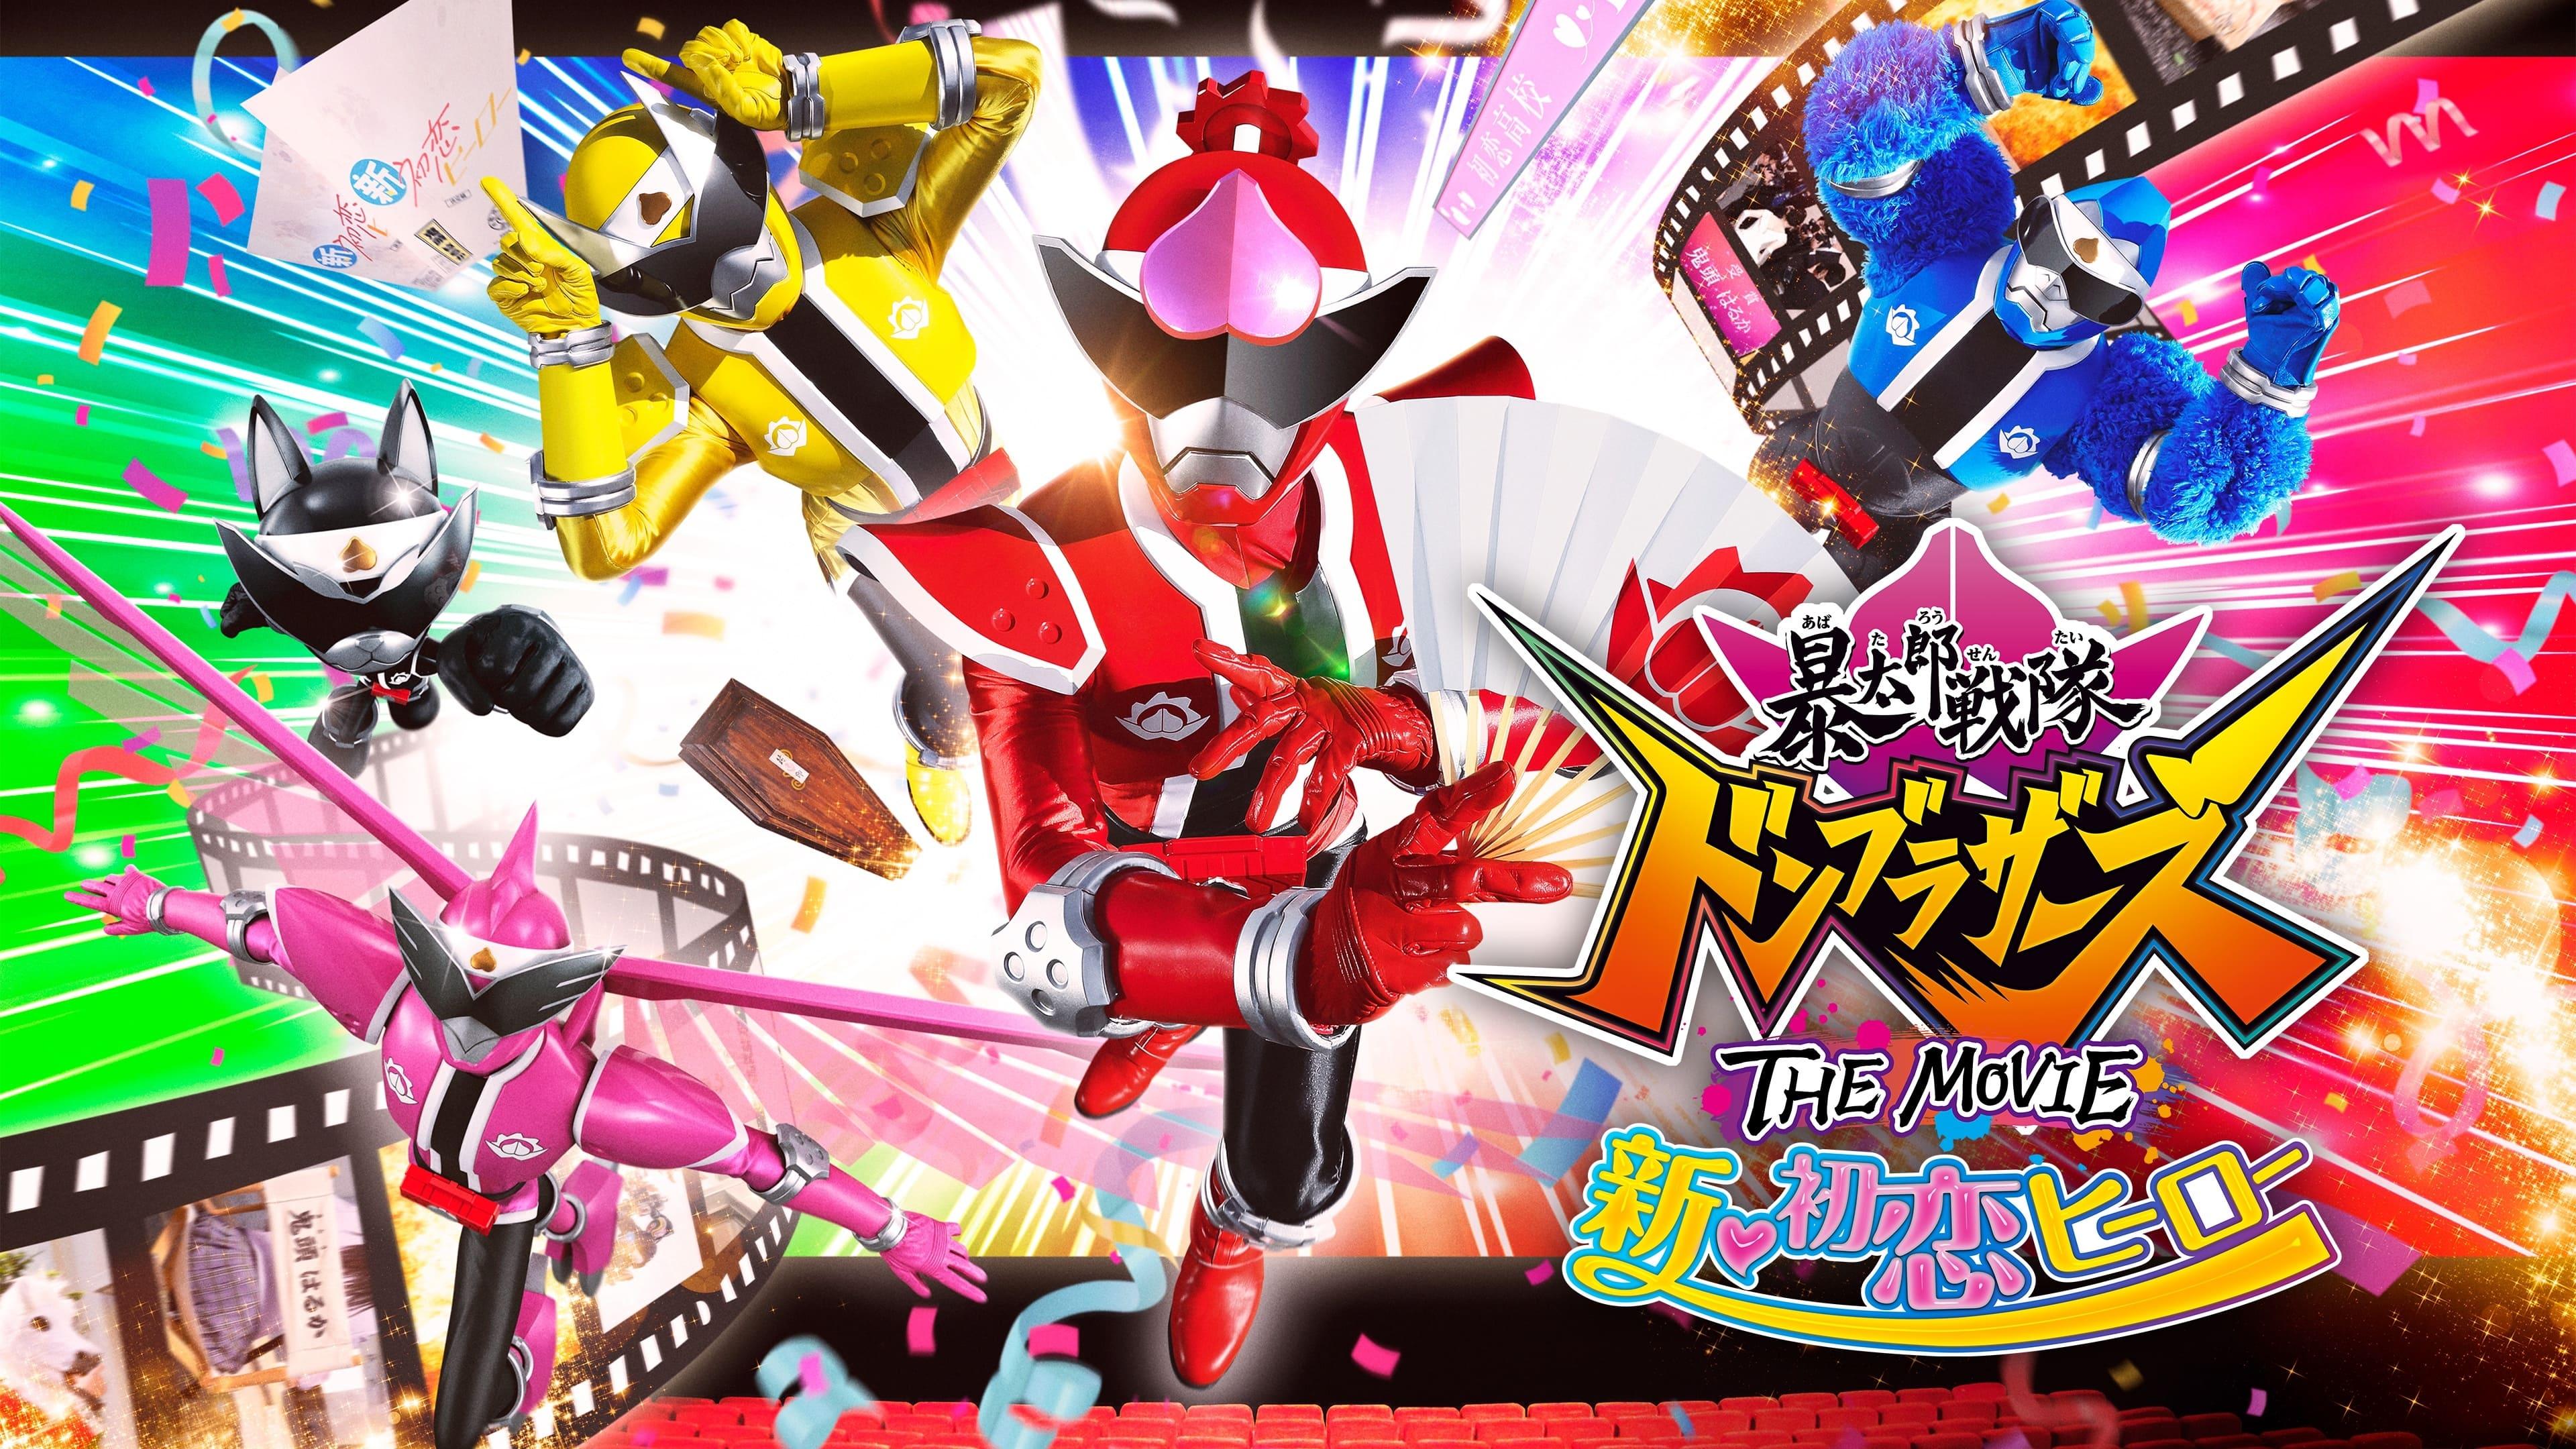 Avataro Sentai Donbrothers The Movie: New First Love Hero backdrop